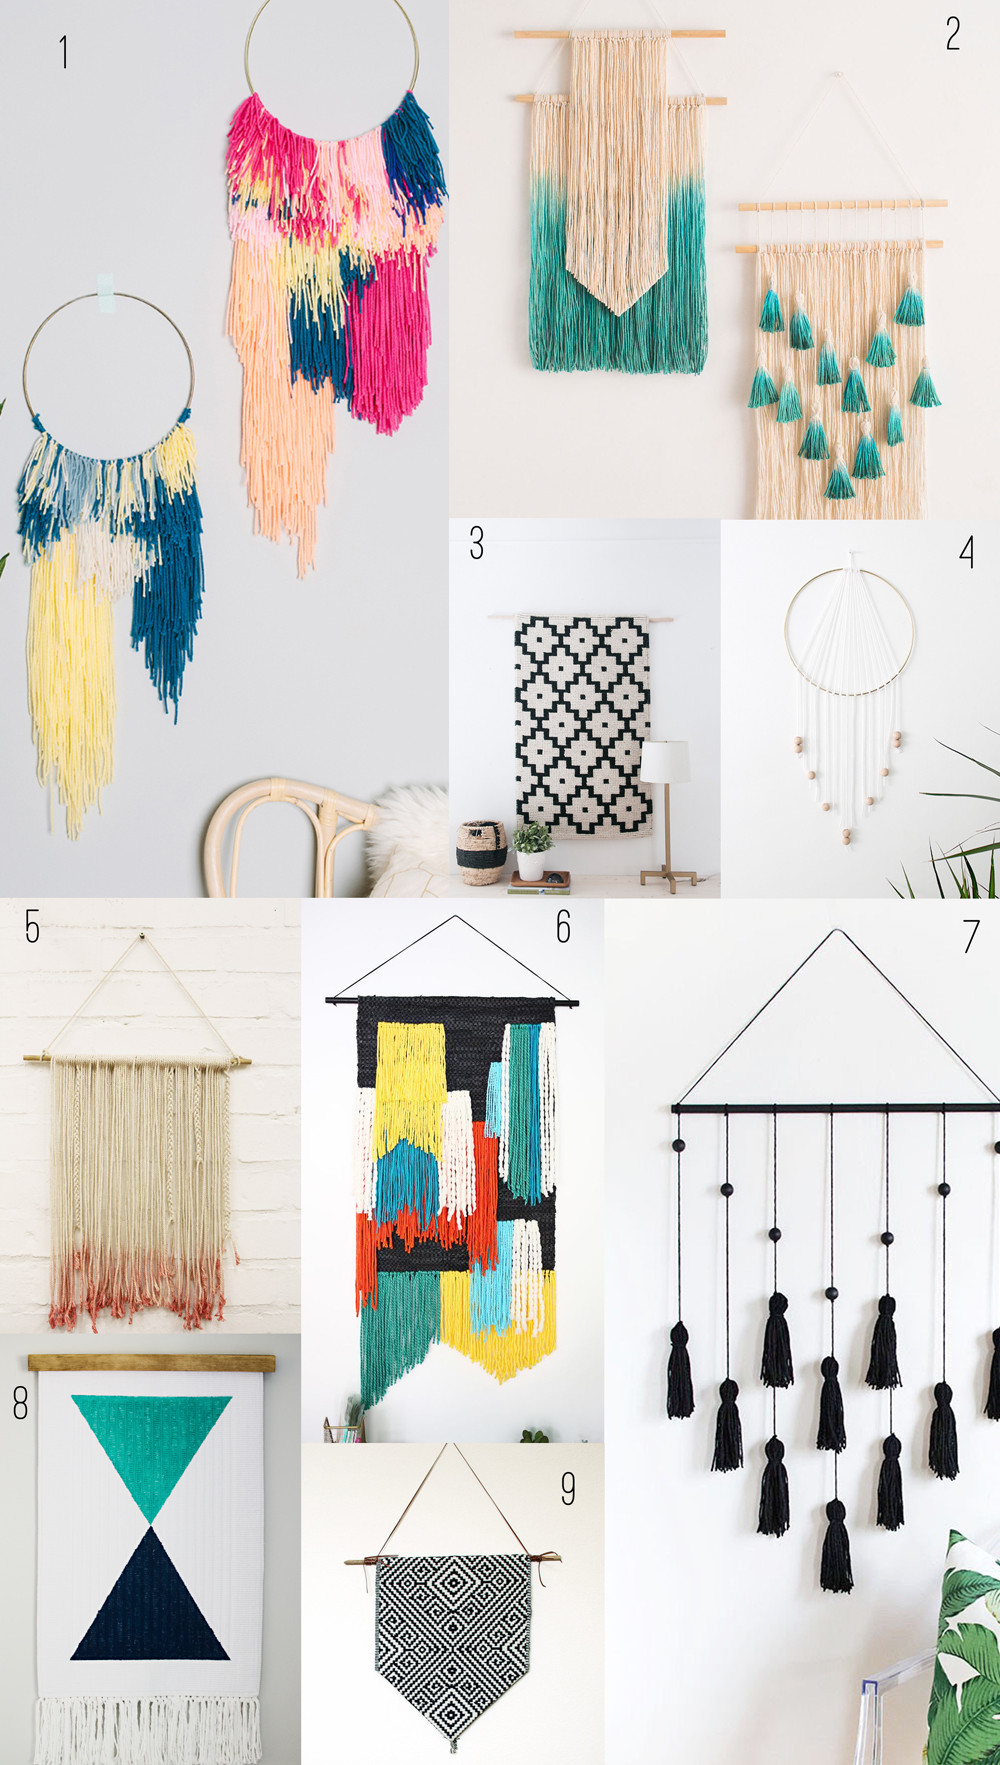 DIY Room Wall Decorations
 9 AMAZING DIY WALL HANGINGS Tell Love and Party